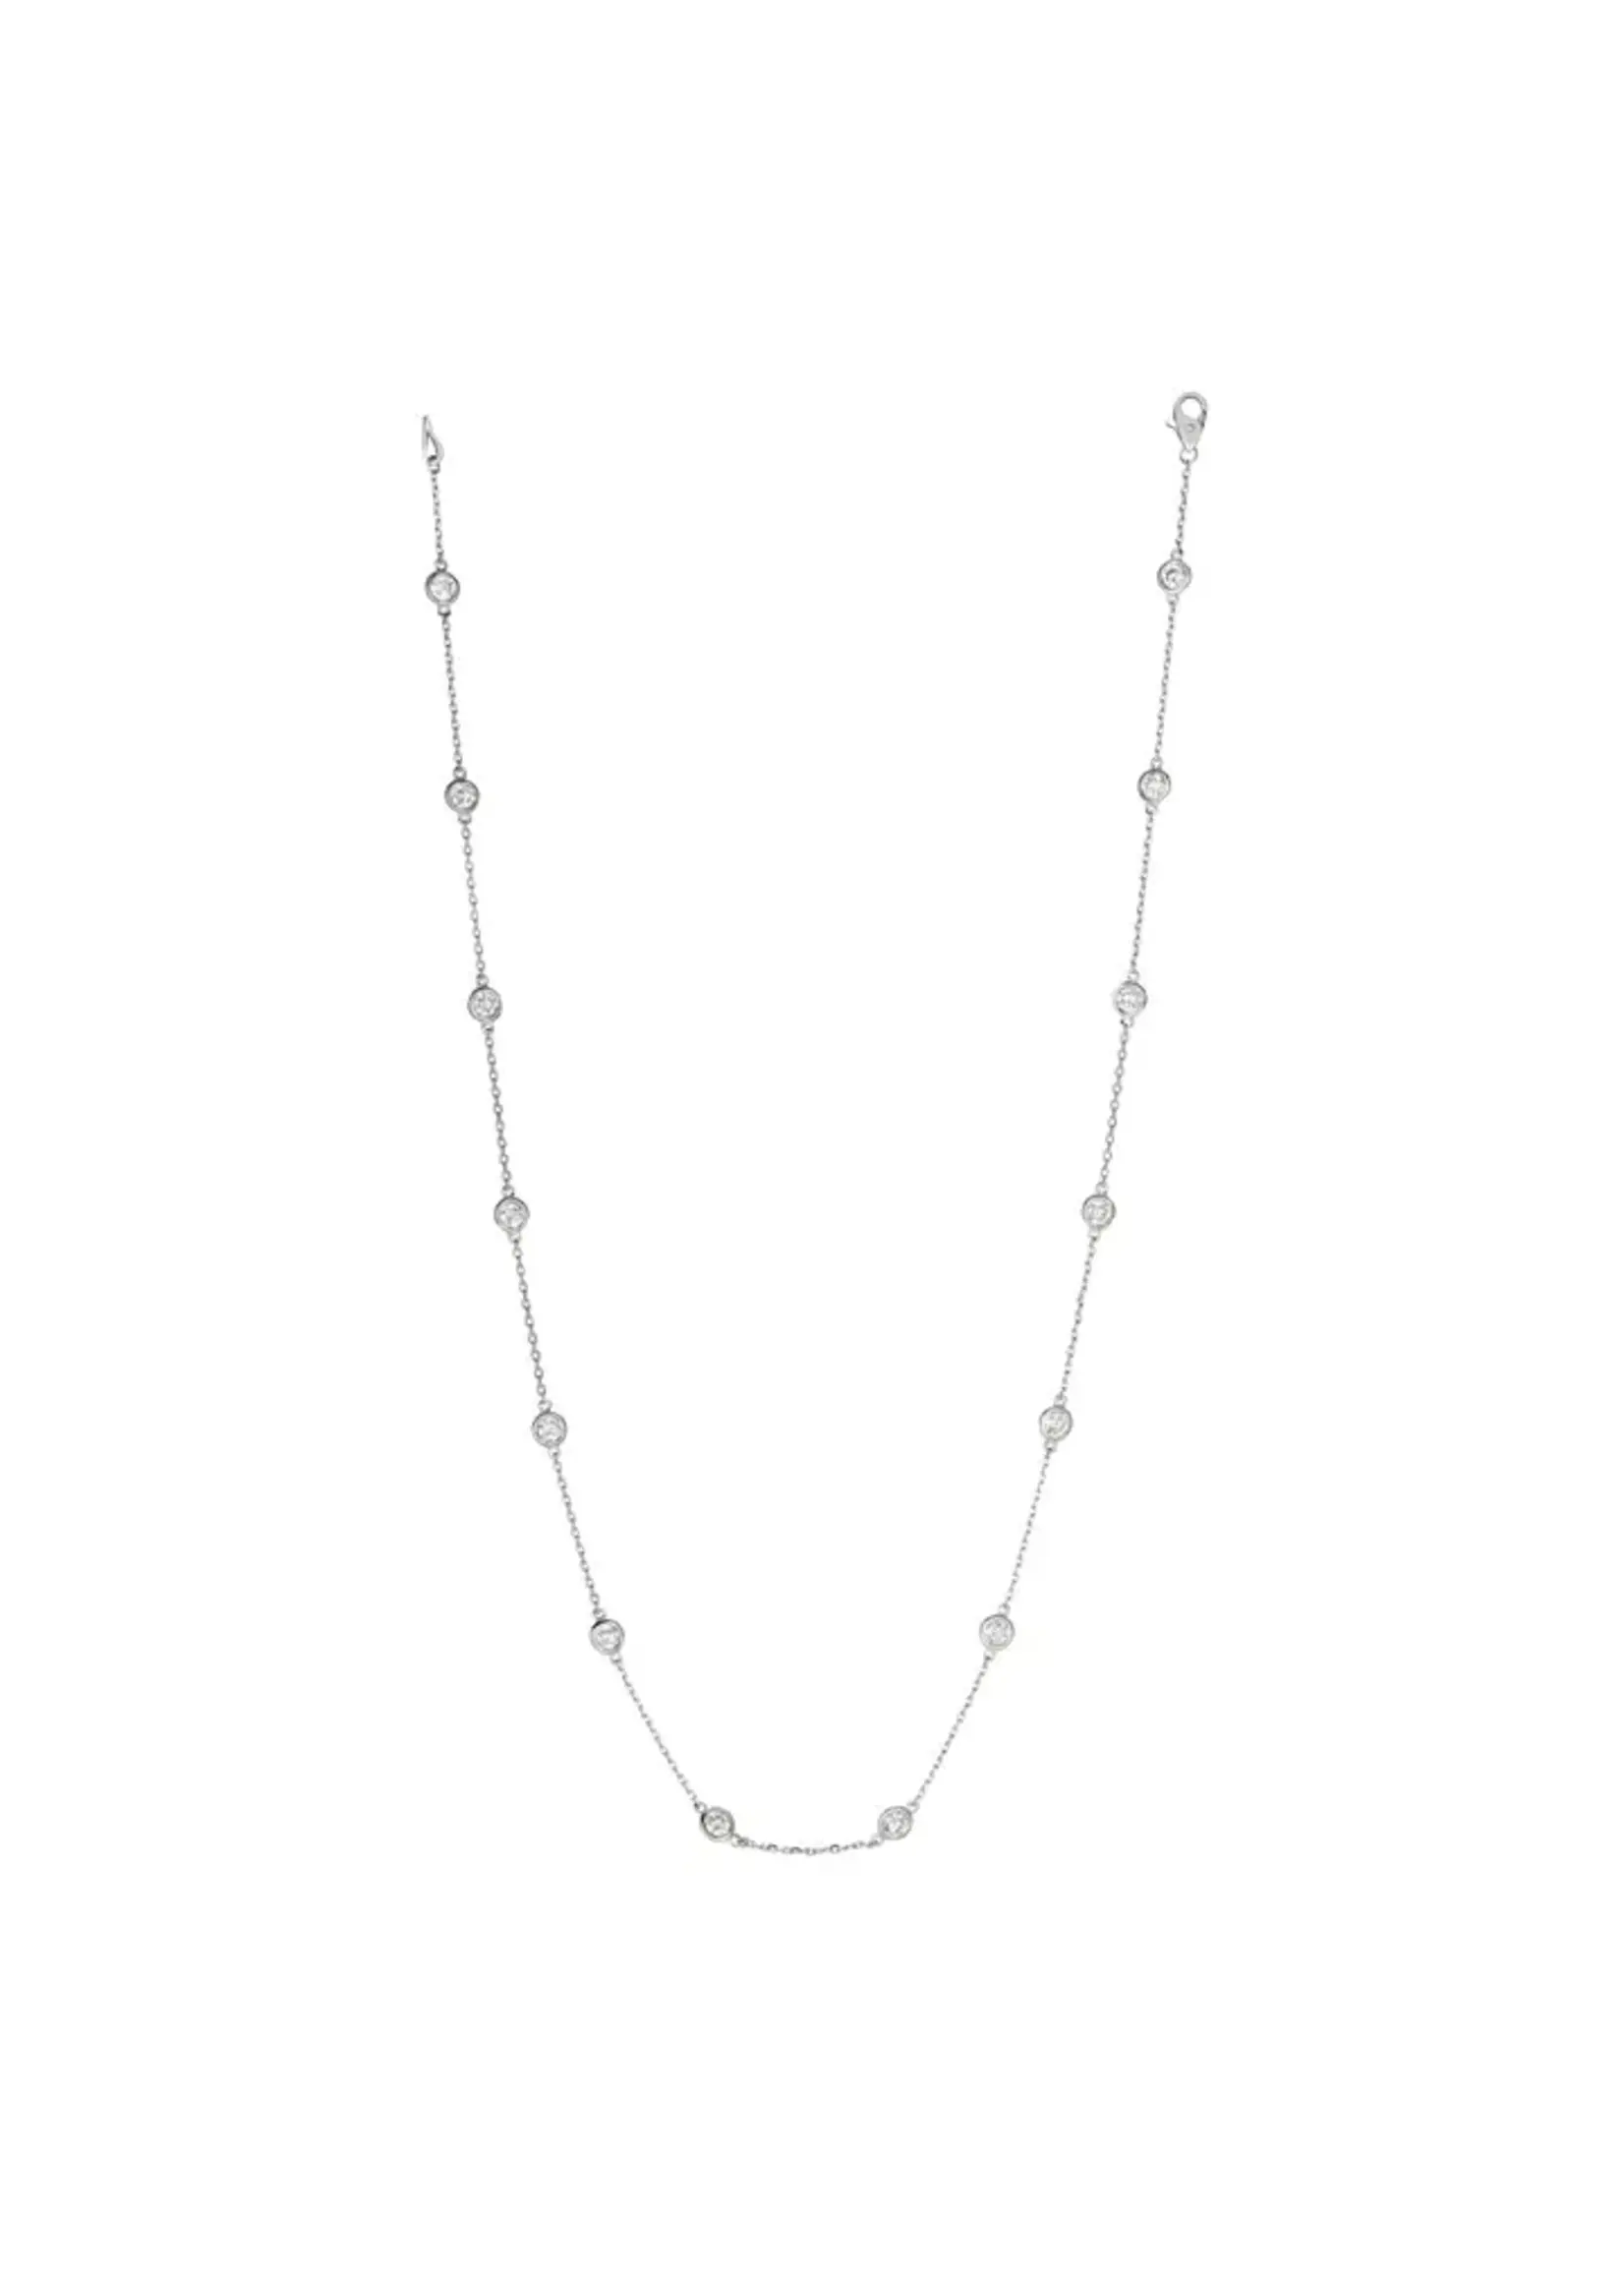 14KW 3.84g 1.04ctw Diamond By The Inch Necklace 16-18-20"